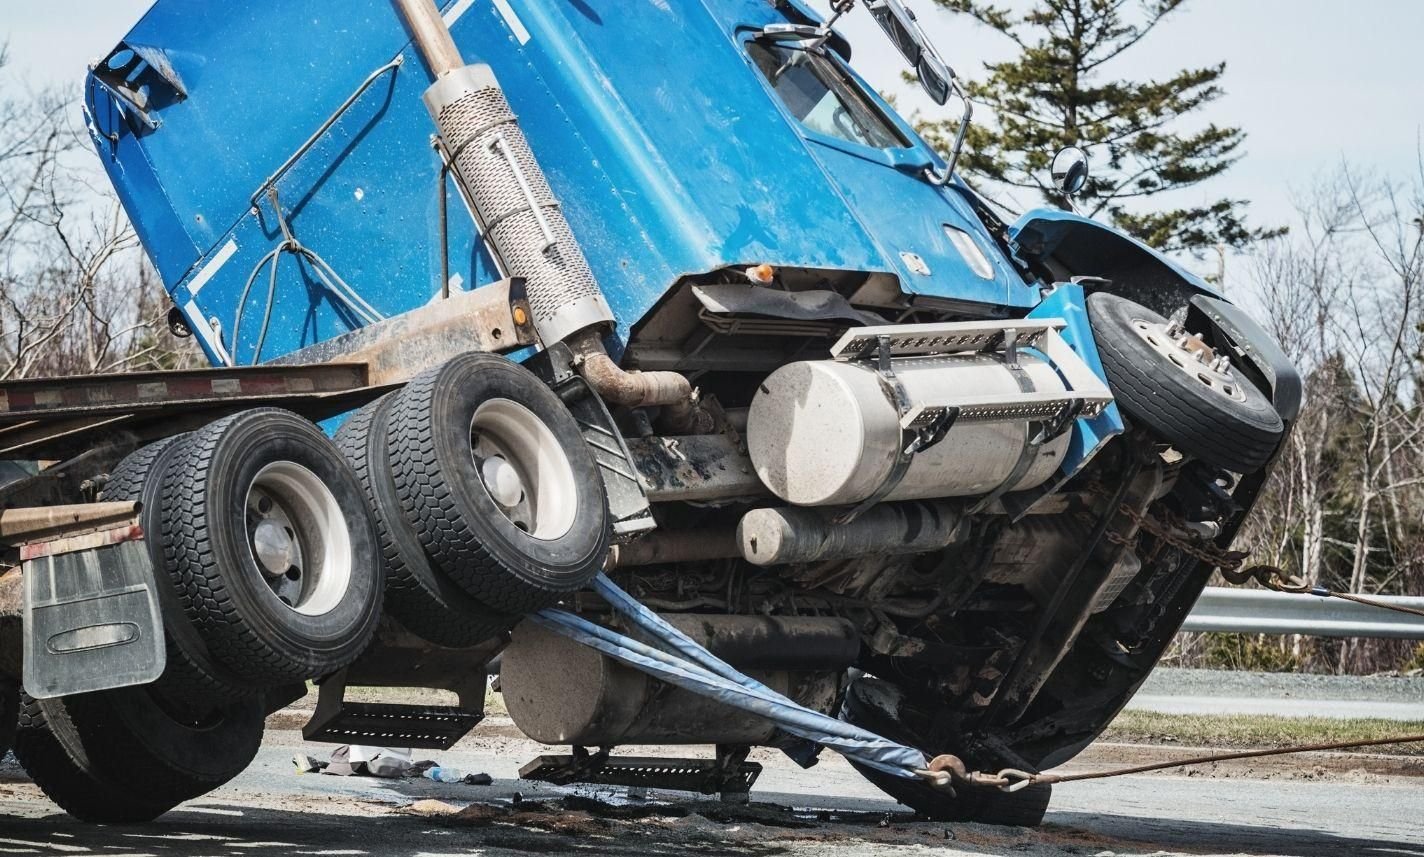 hoboken-commercial-truck-accident-injury-lawyer